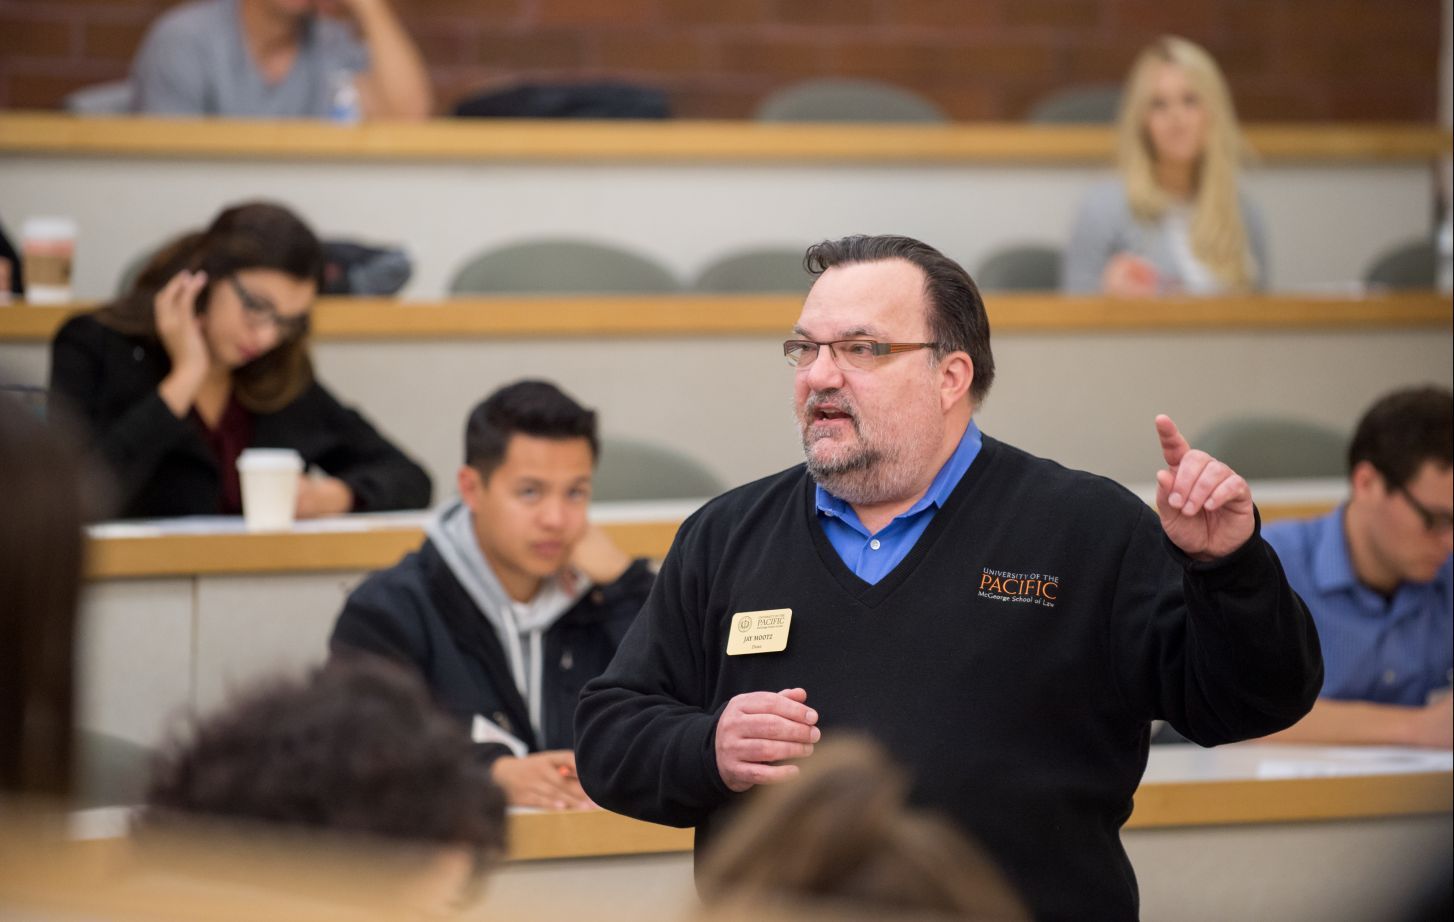 Professor Francis J. Mootz III speaks to a classroom of students while making a hand gesture.